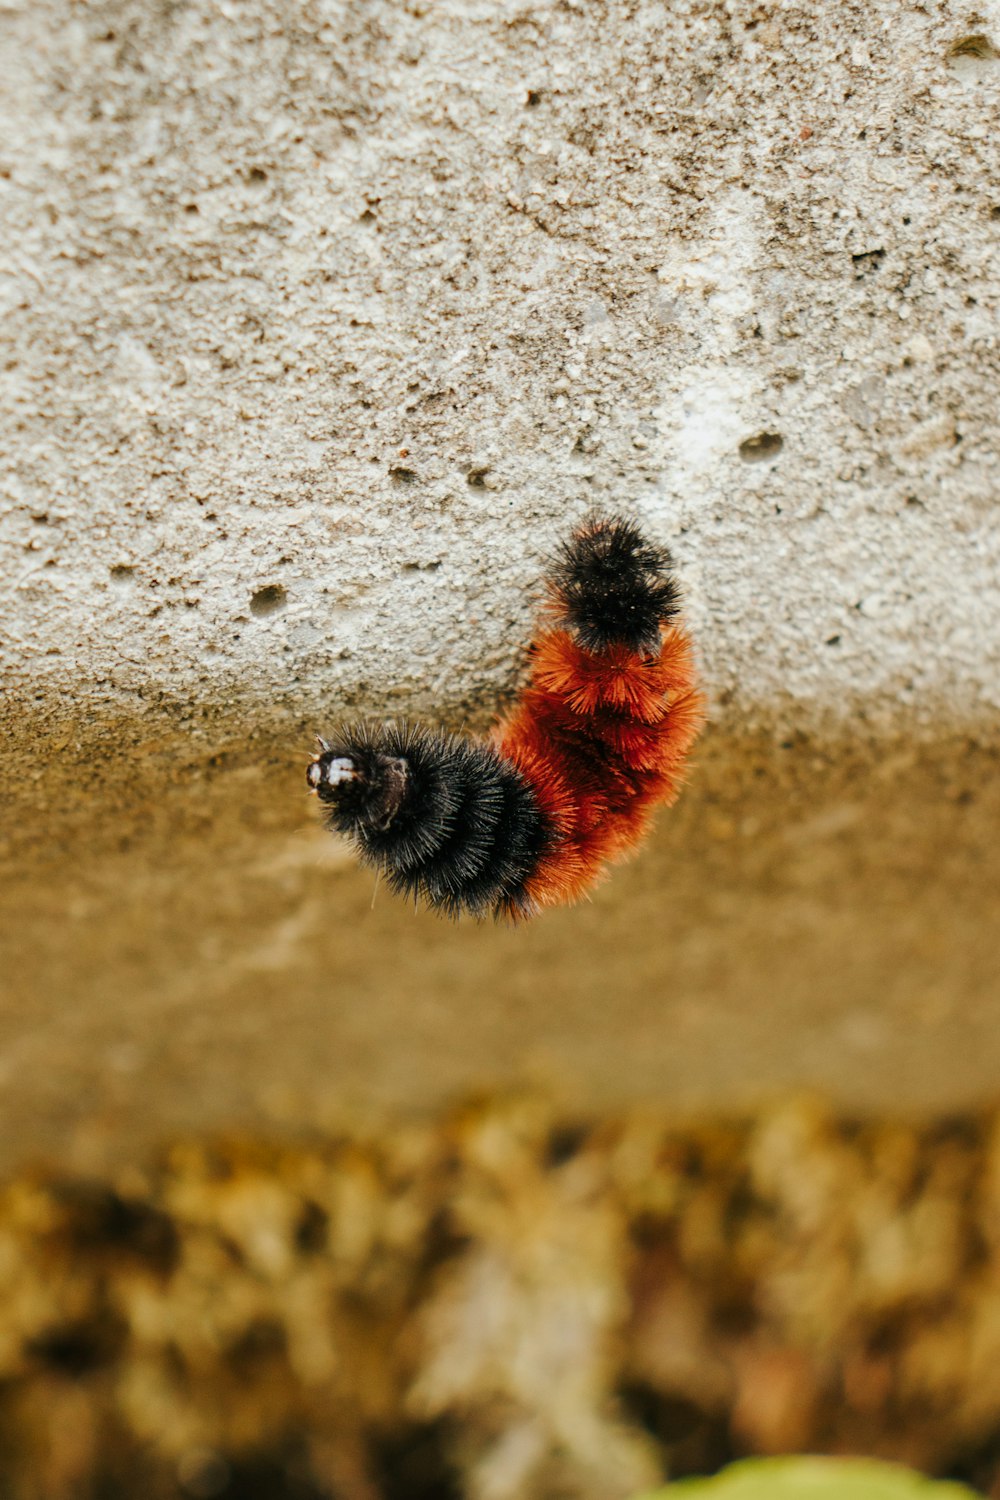 a red and black caterpillar